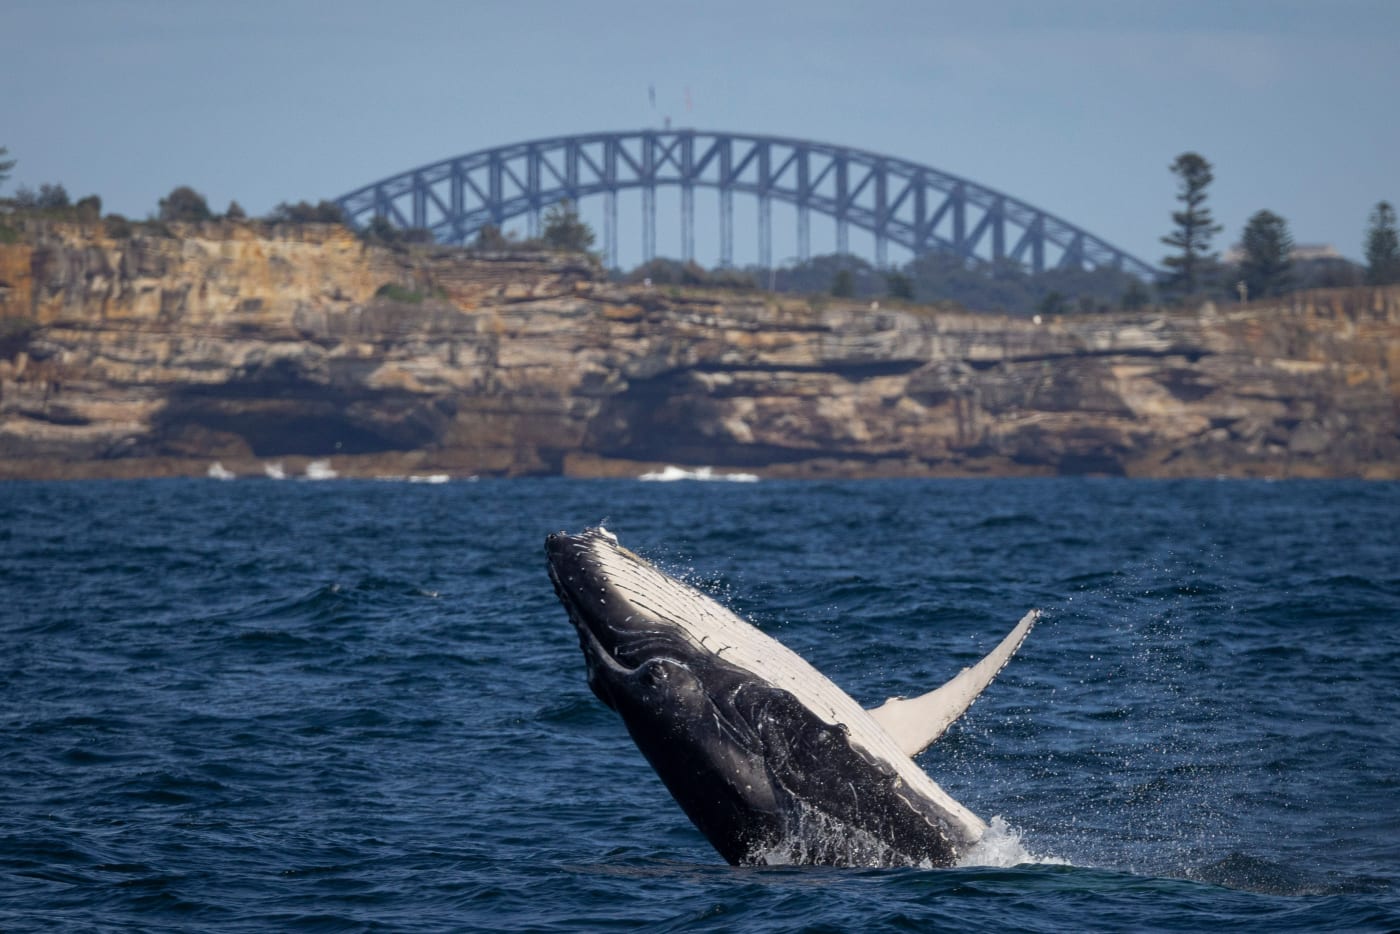 Juvenile humpback whale calf breaching off South Head with the Sydney Harbour Bridge in the background, Sydney, Australia